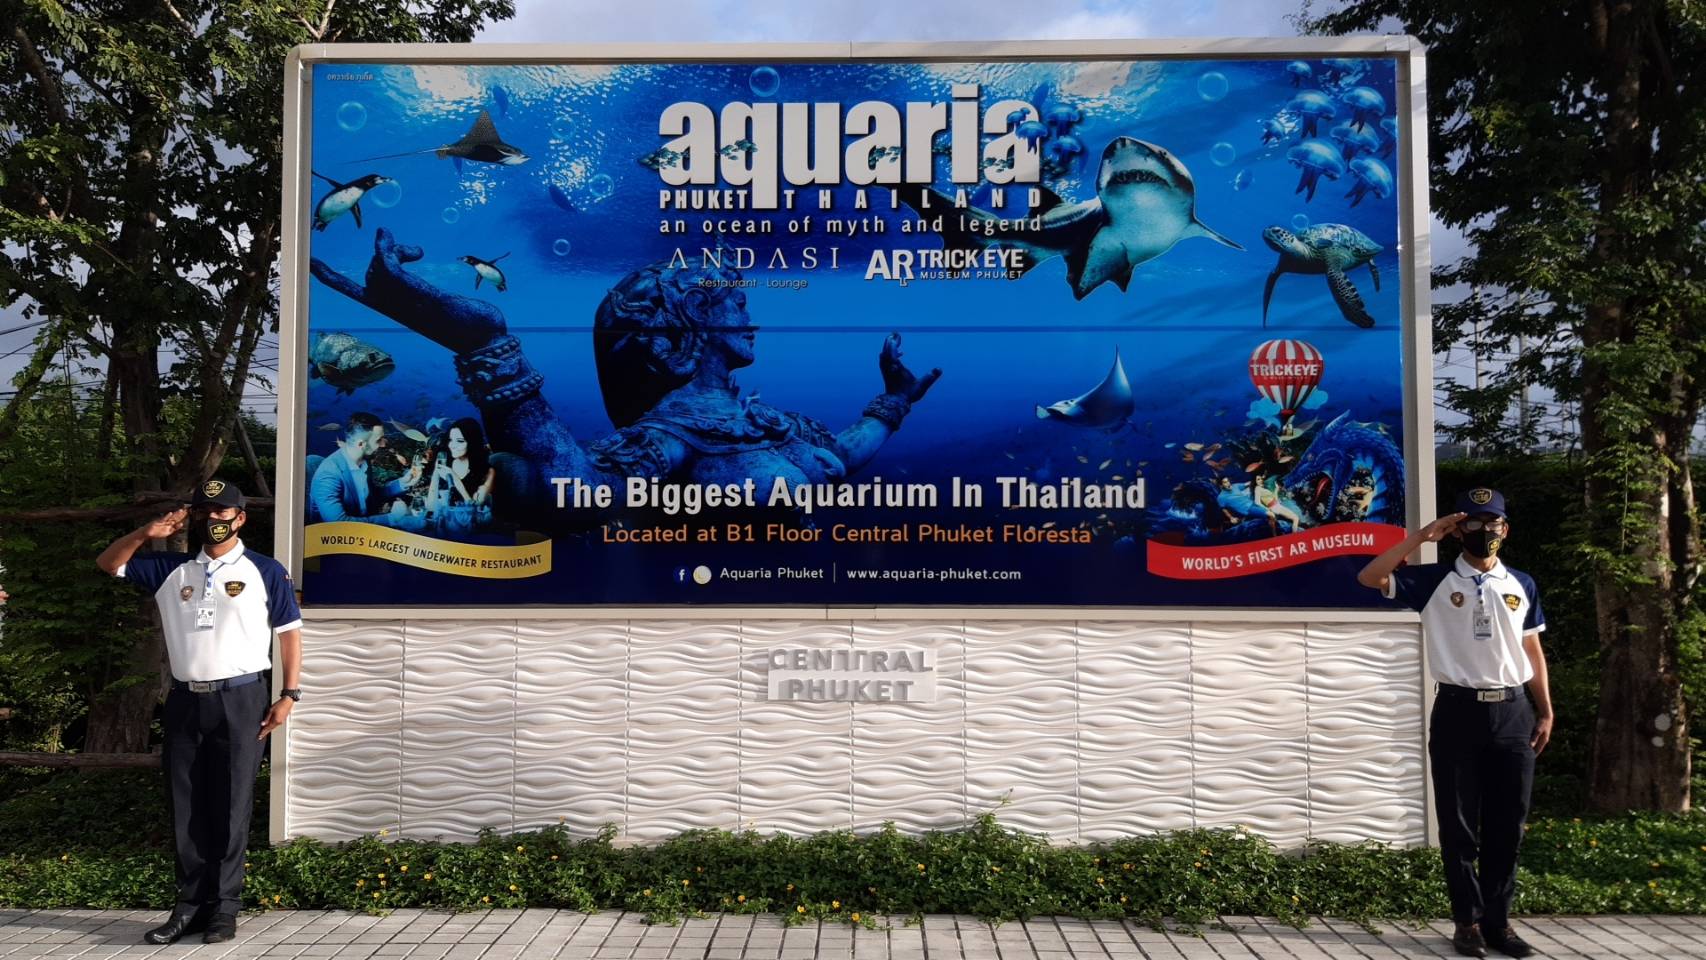 Royal Security Solutions new contract with Aquaria Phuket